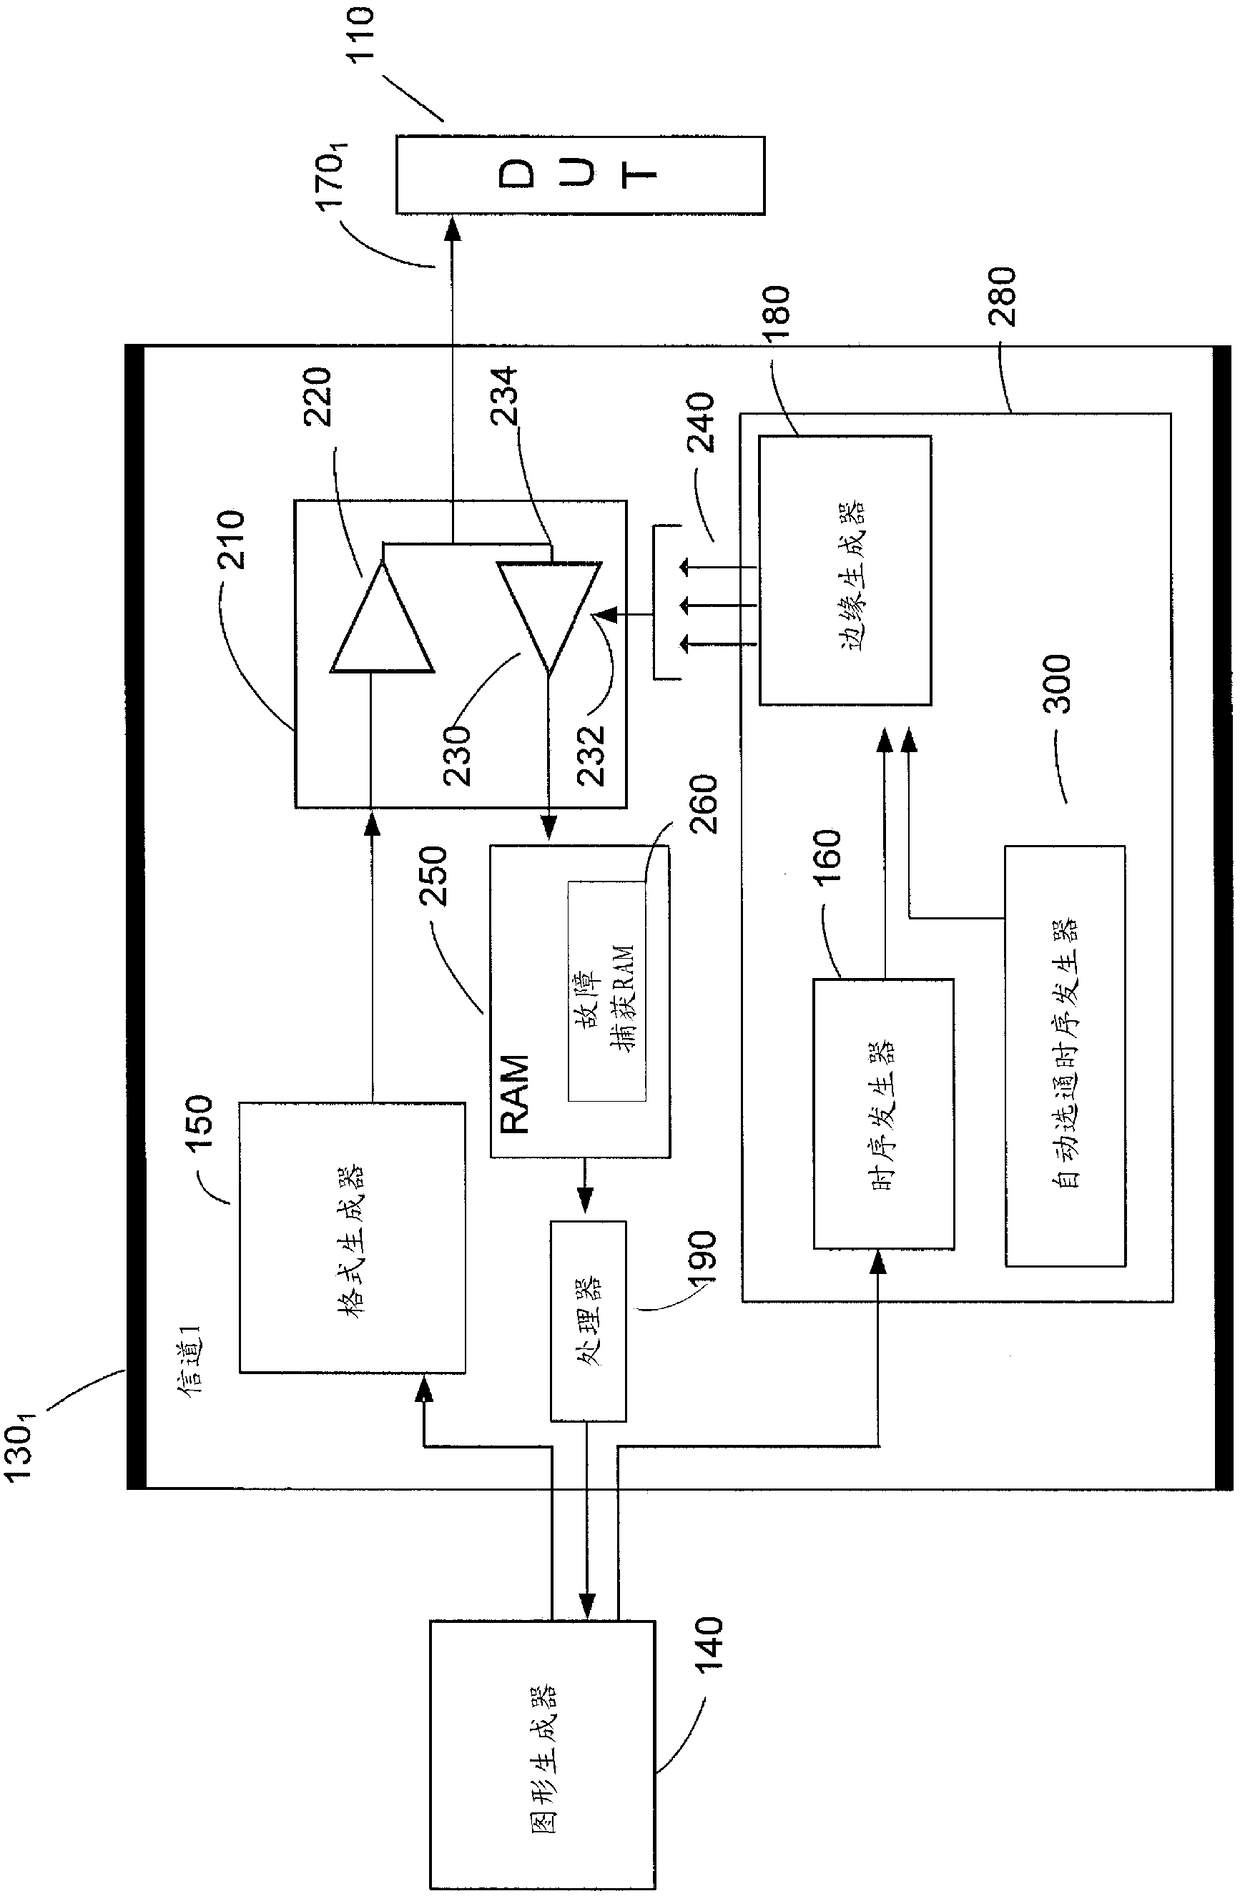 Automatic test system with event detection capability